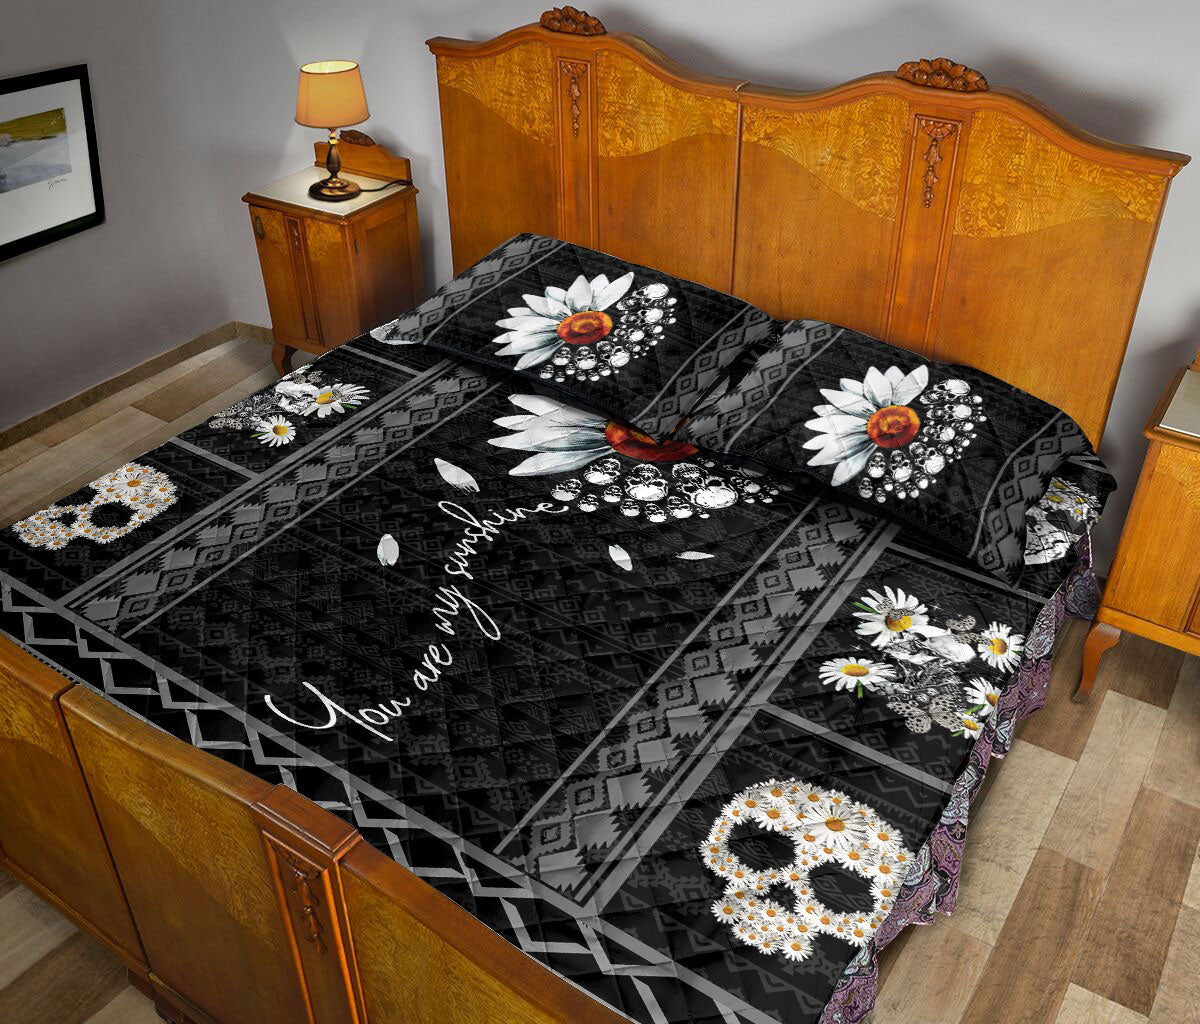 Ohaprints-Quilt-Bed-Set-Pillowcase-Skull-Daisy-You-Are-My-Sunshine-Flower-Skull-Unique-Idea-Blanket-Bedspread-Bedding-45-Queen (80'' x 90'')